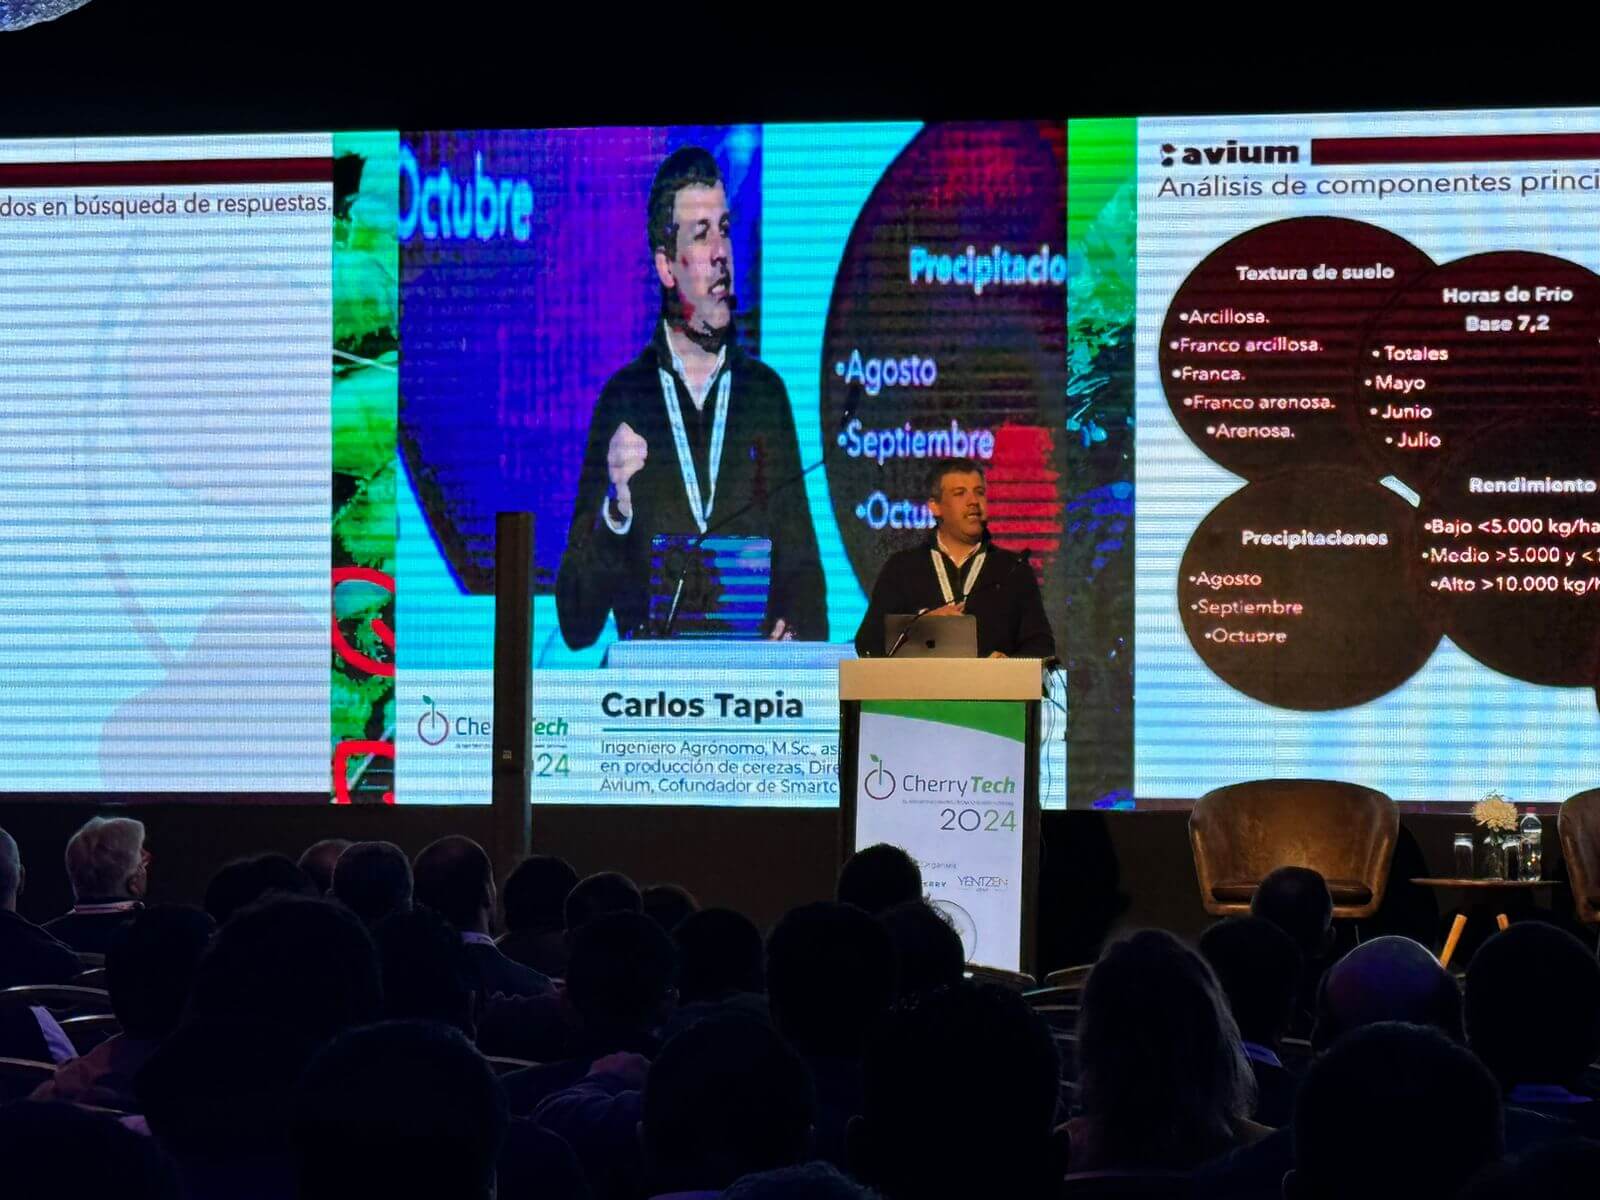 Innovation, sustainability and production potential the focus of Cherry Tech 2024 in Chile